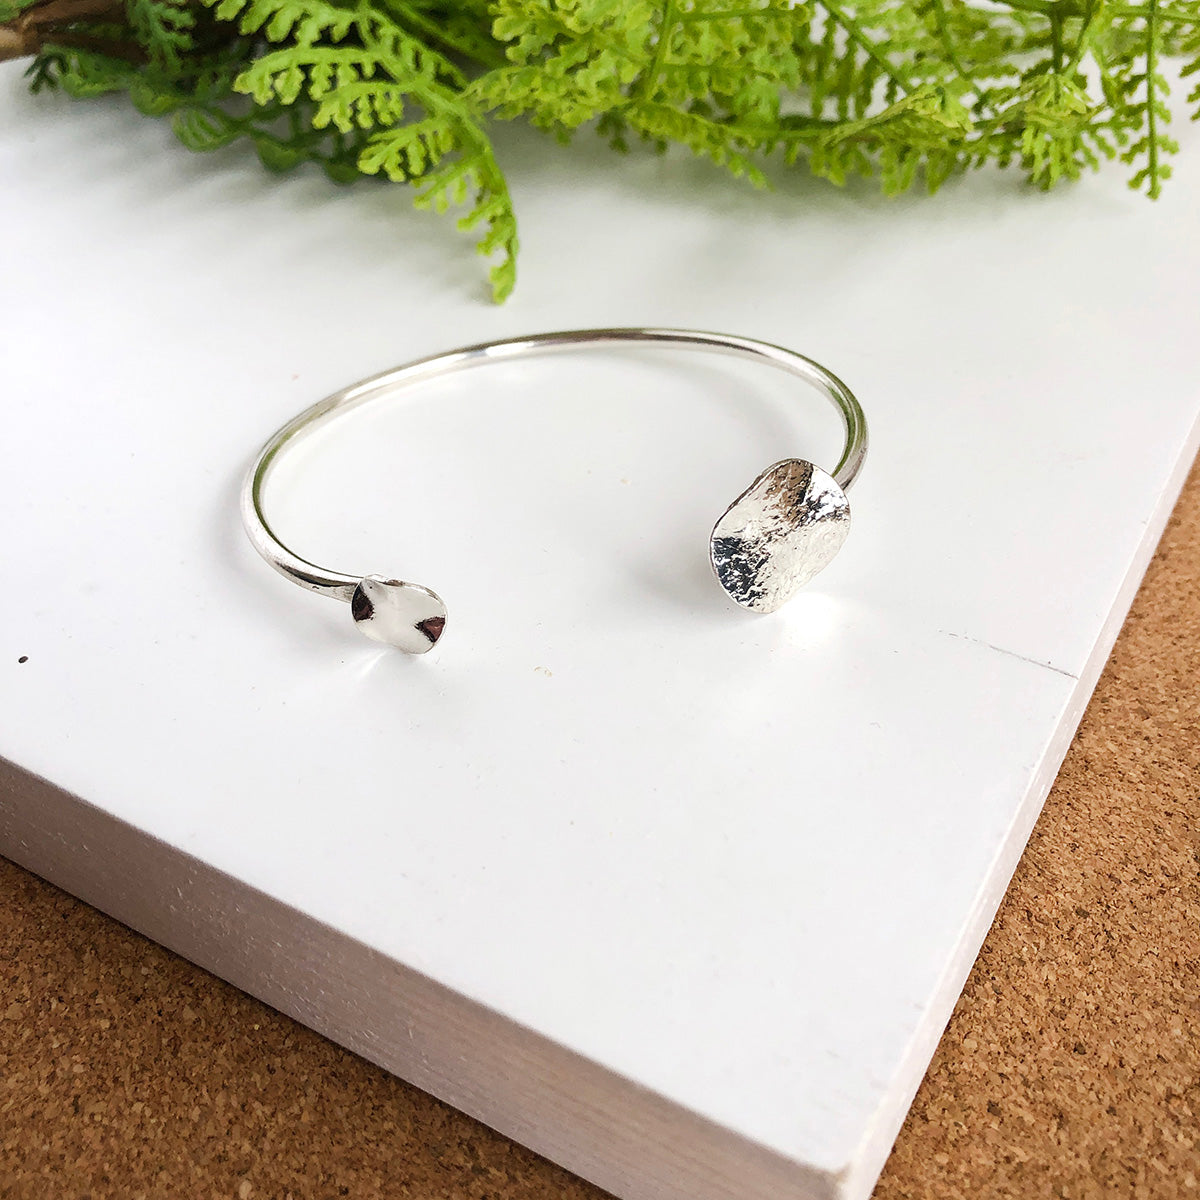 Image of the silver Solaris Cuff, next to a green plant.